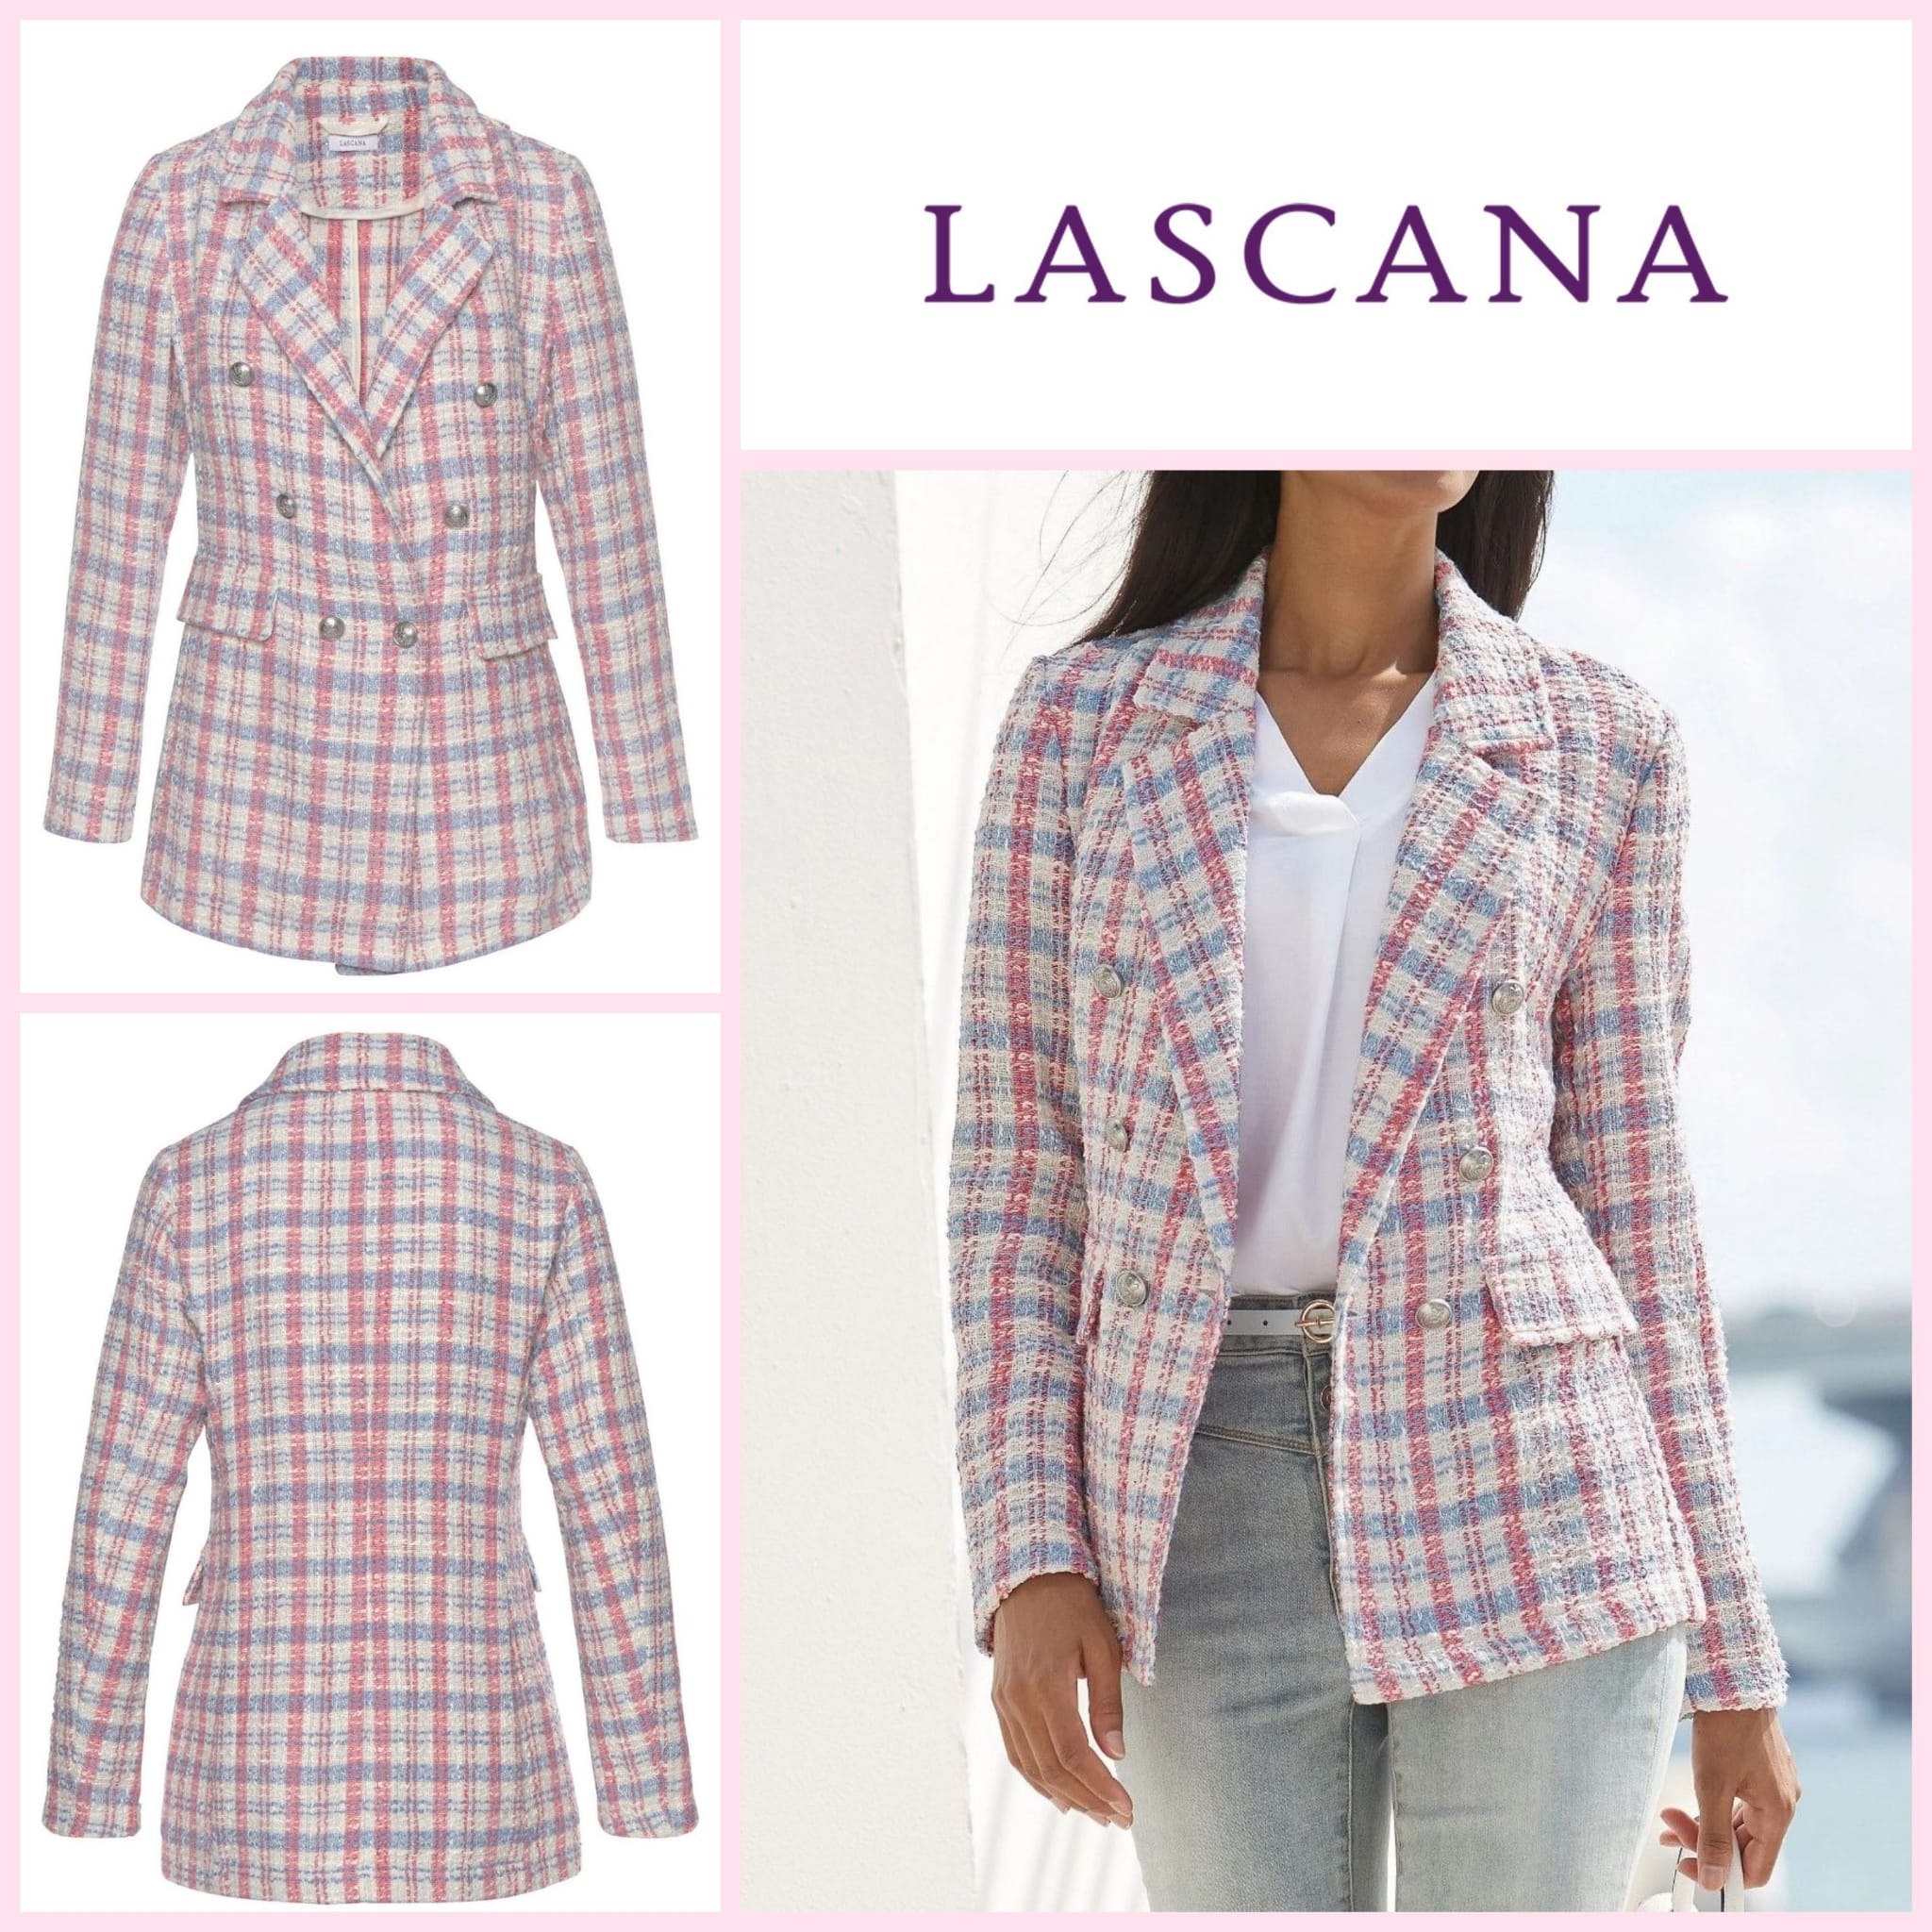 Women's checked jacket by Lascana